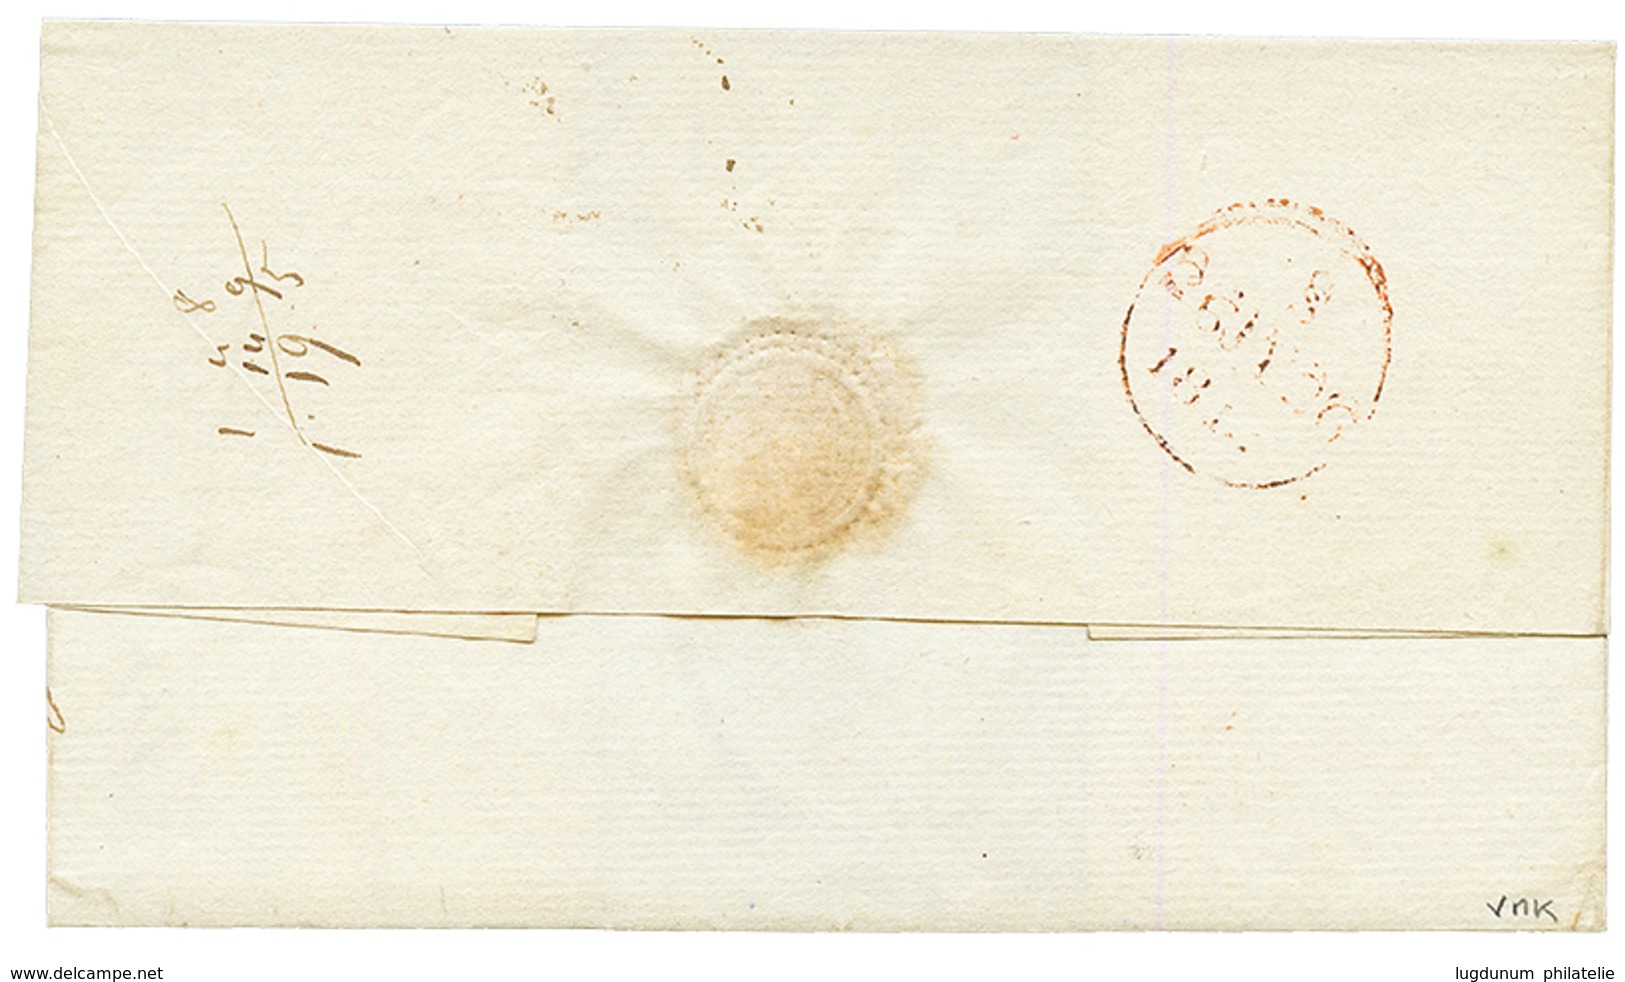 CURACAO - BRITISH PACKET AGENCY : 1812 "FLEURON" Cachet CURACAO On Entire (no Text) Datelined "25 May 1812" To LONDON. R - Curaçao, Nederlandse Antillen, Aruba